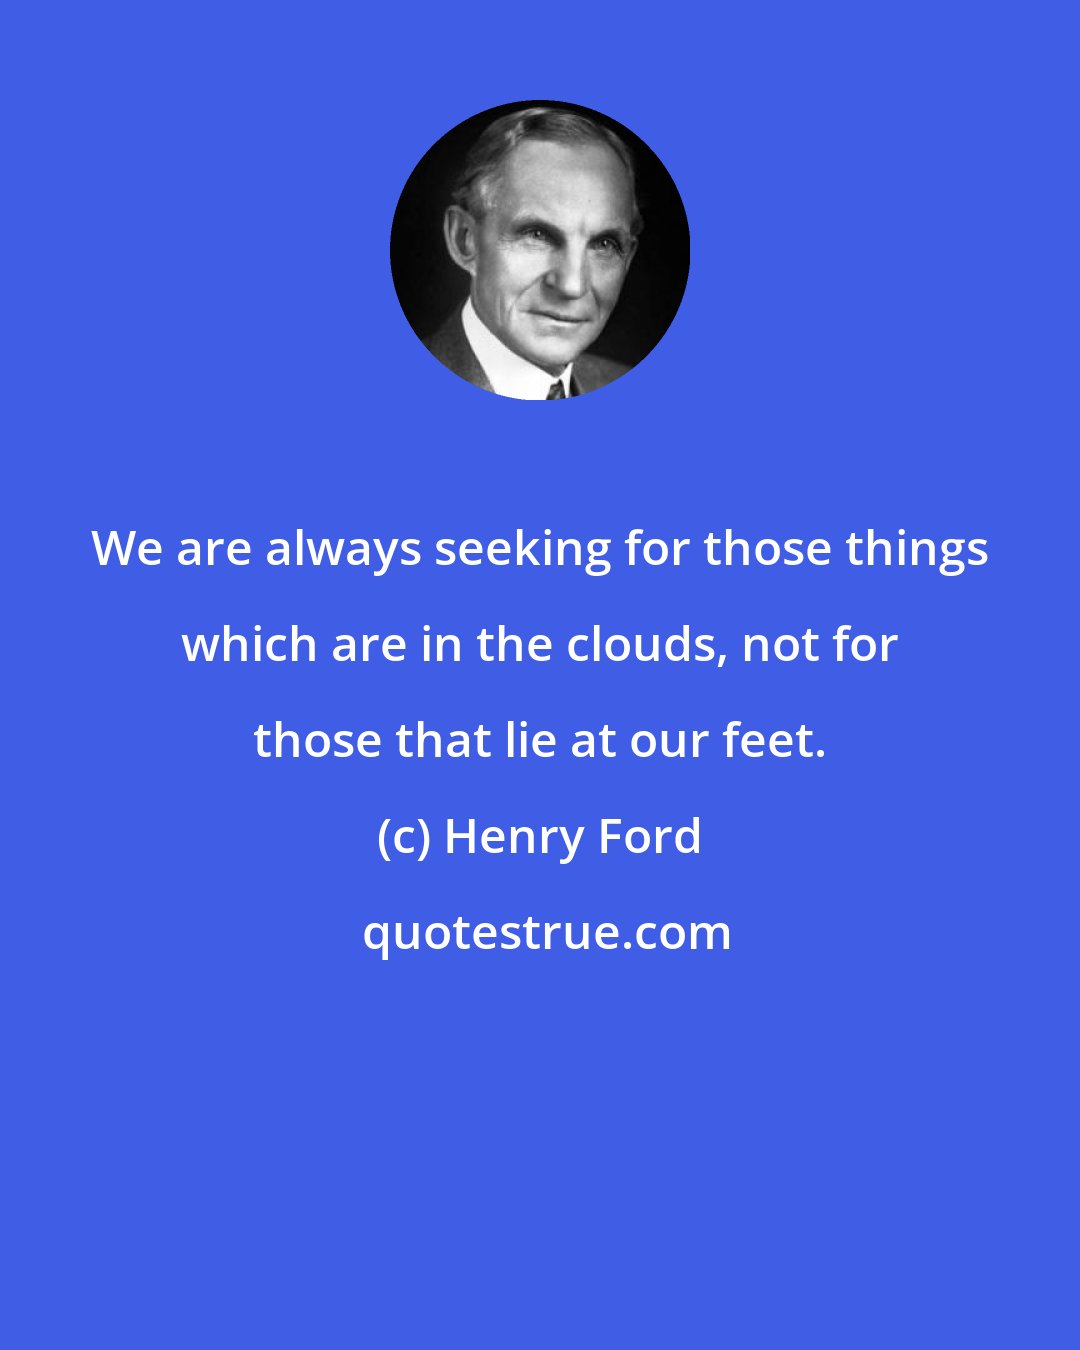 Henry Ford: We are always seeking for those things which are in the clouds, not for those that lie at our feet.